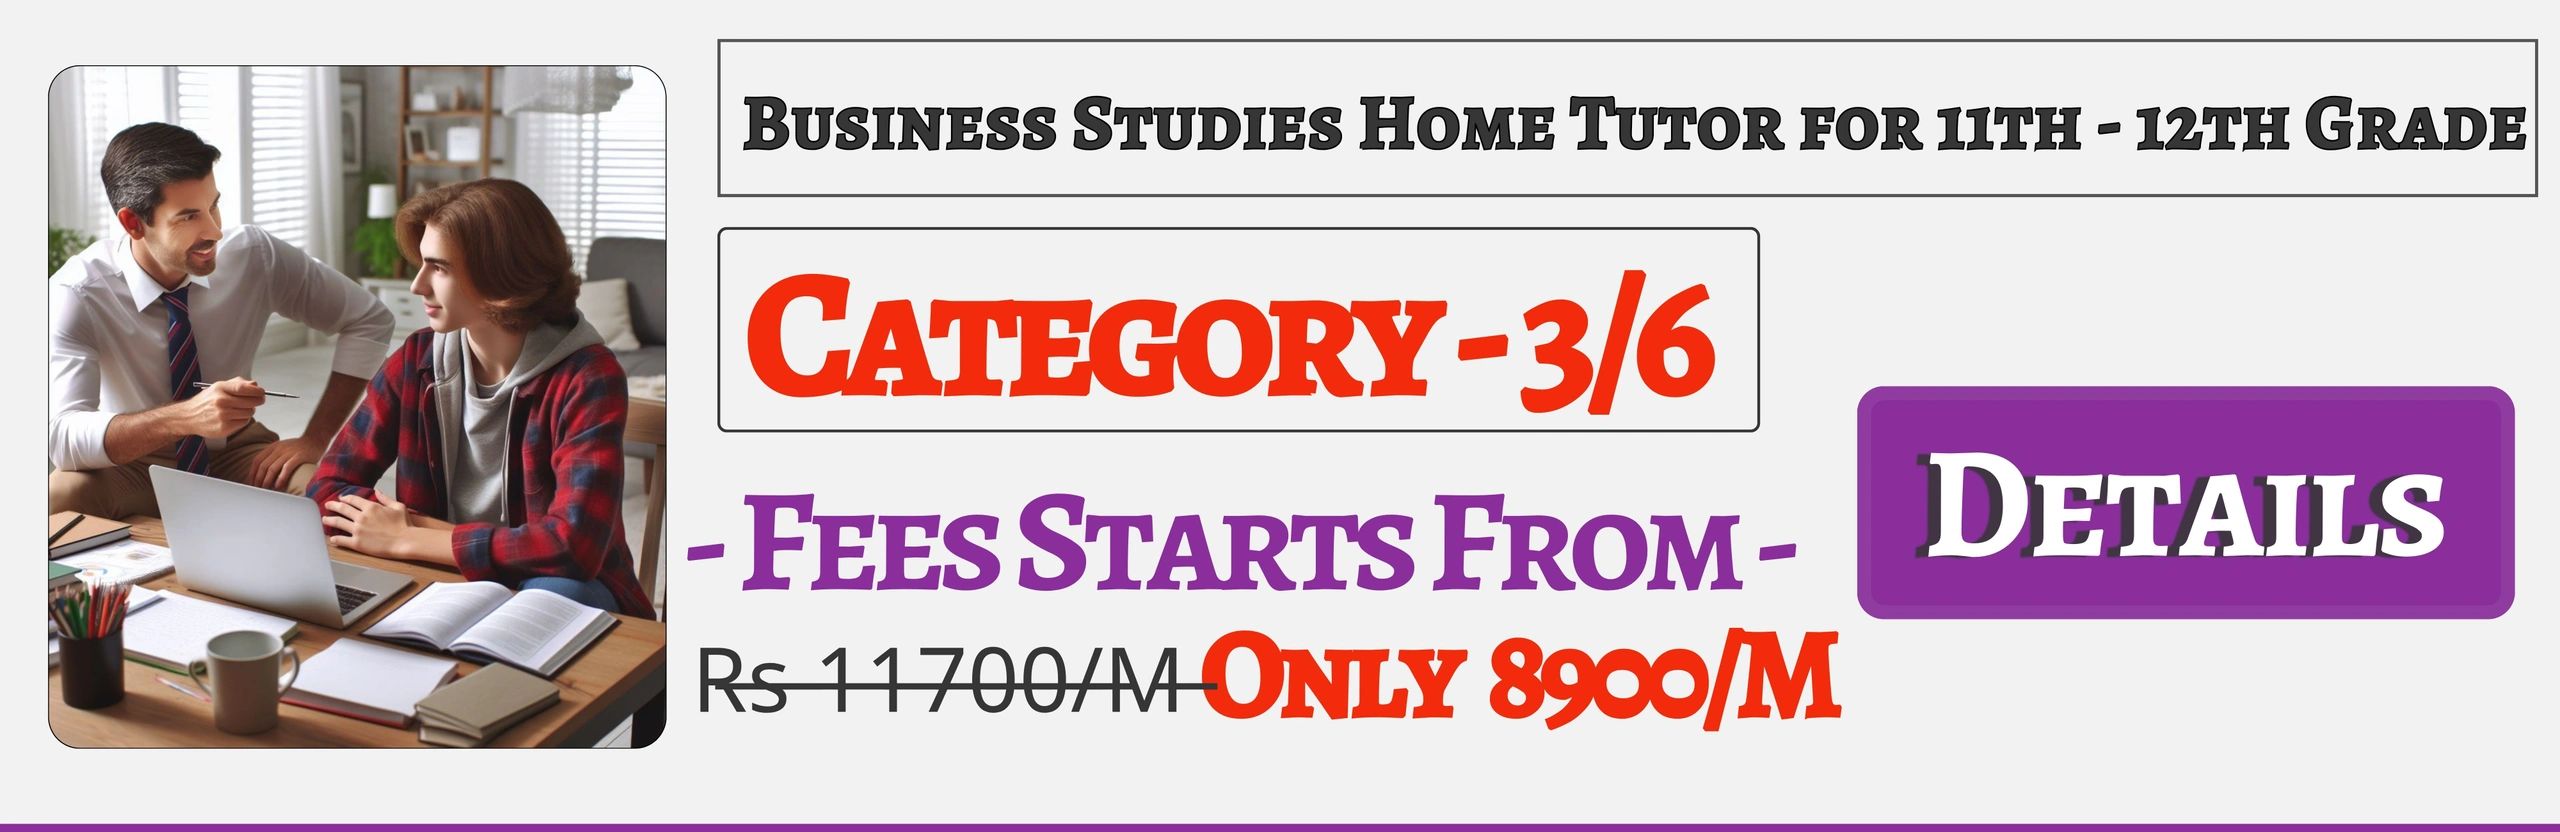 Book Best Nearby Business Studies Home Tuition Tutors For 11th & 12th Jaipur ,Fees Only 8900/M